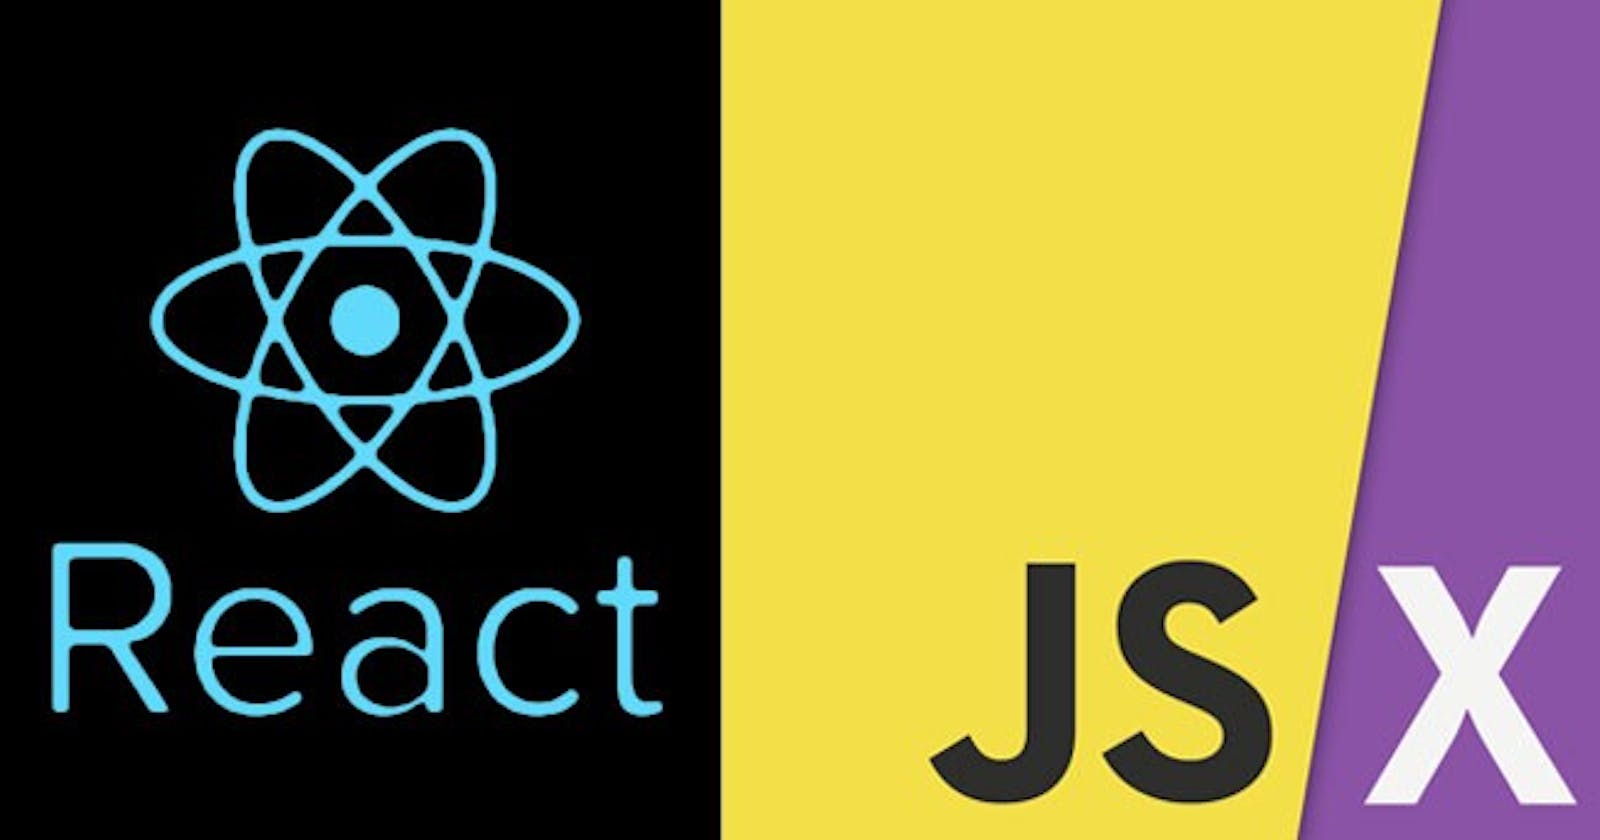 Introduction to JSX